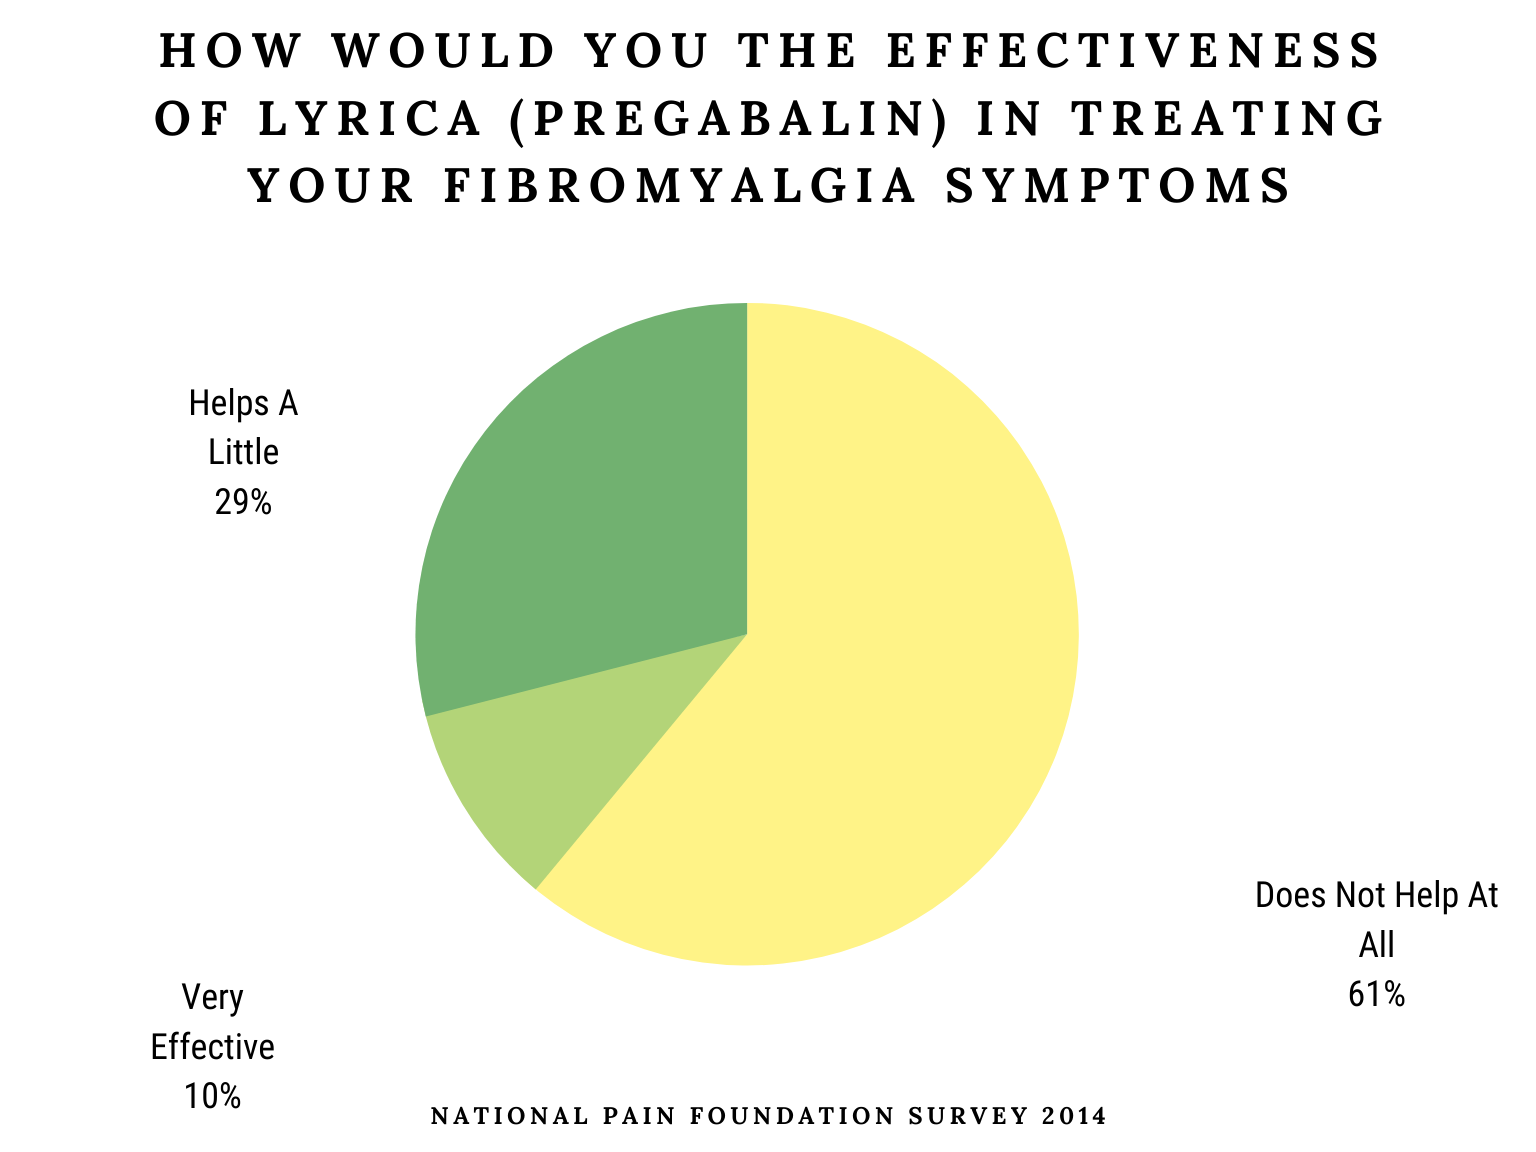 How Would You The Effectiveness Of Lyrica (Pregabalin) In Treating Your Fibromyalgia Symptoms